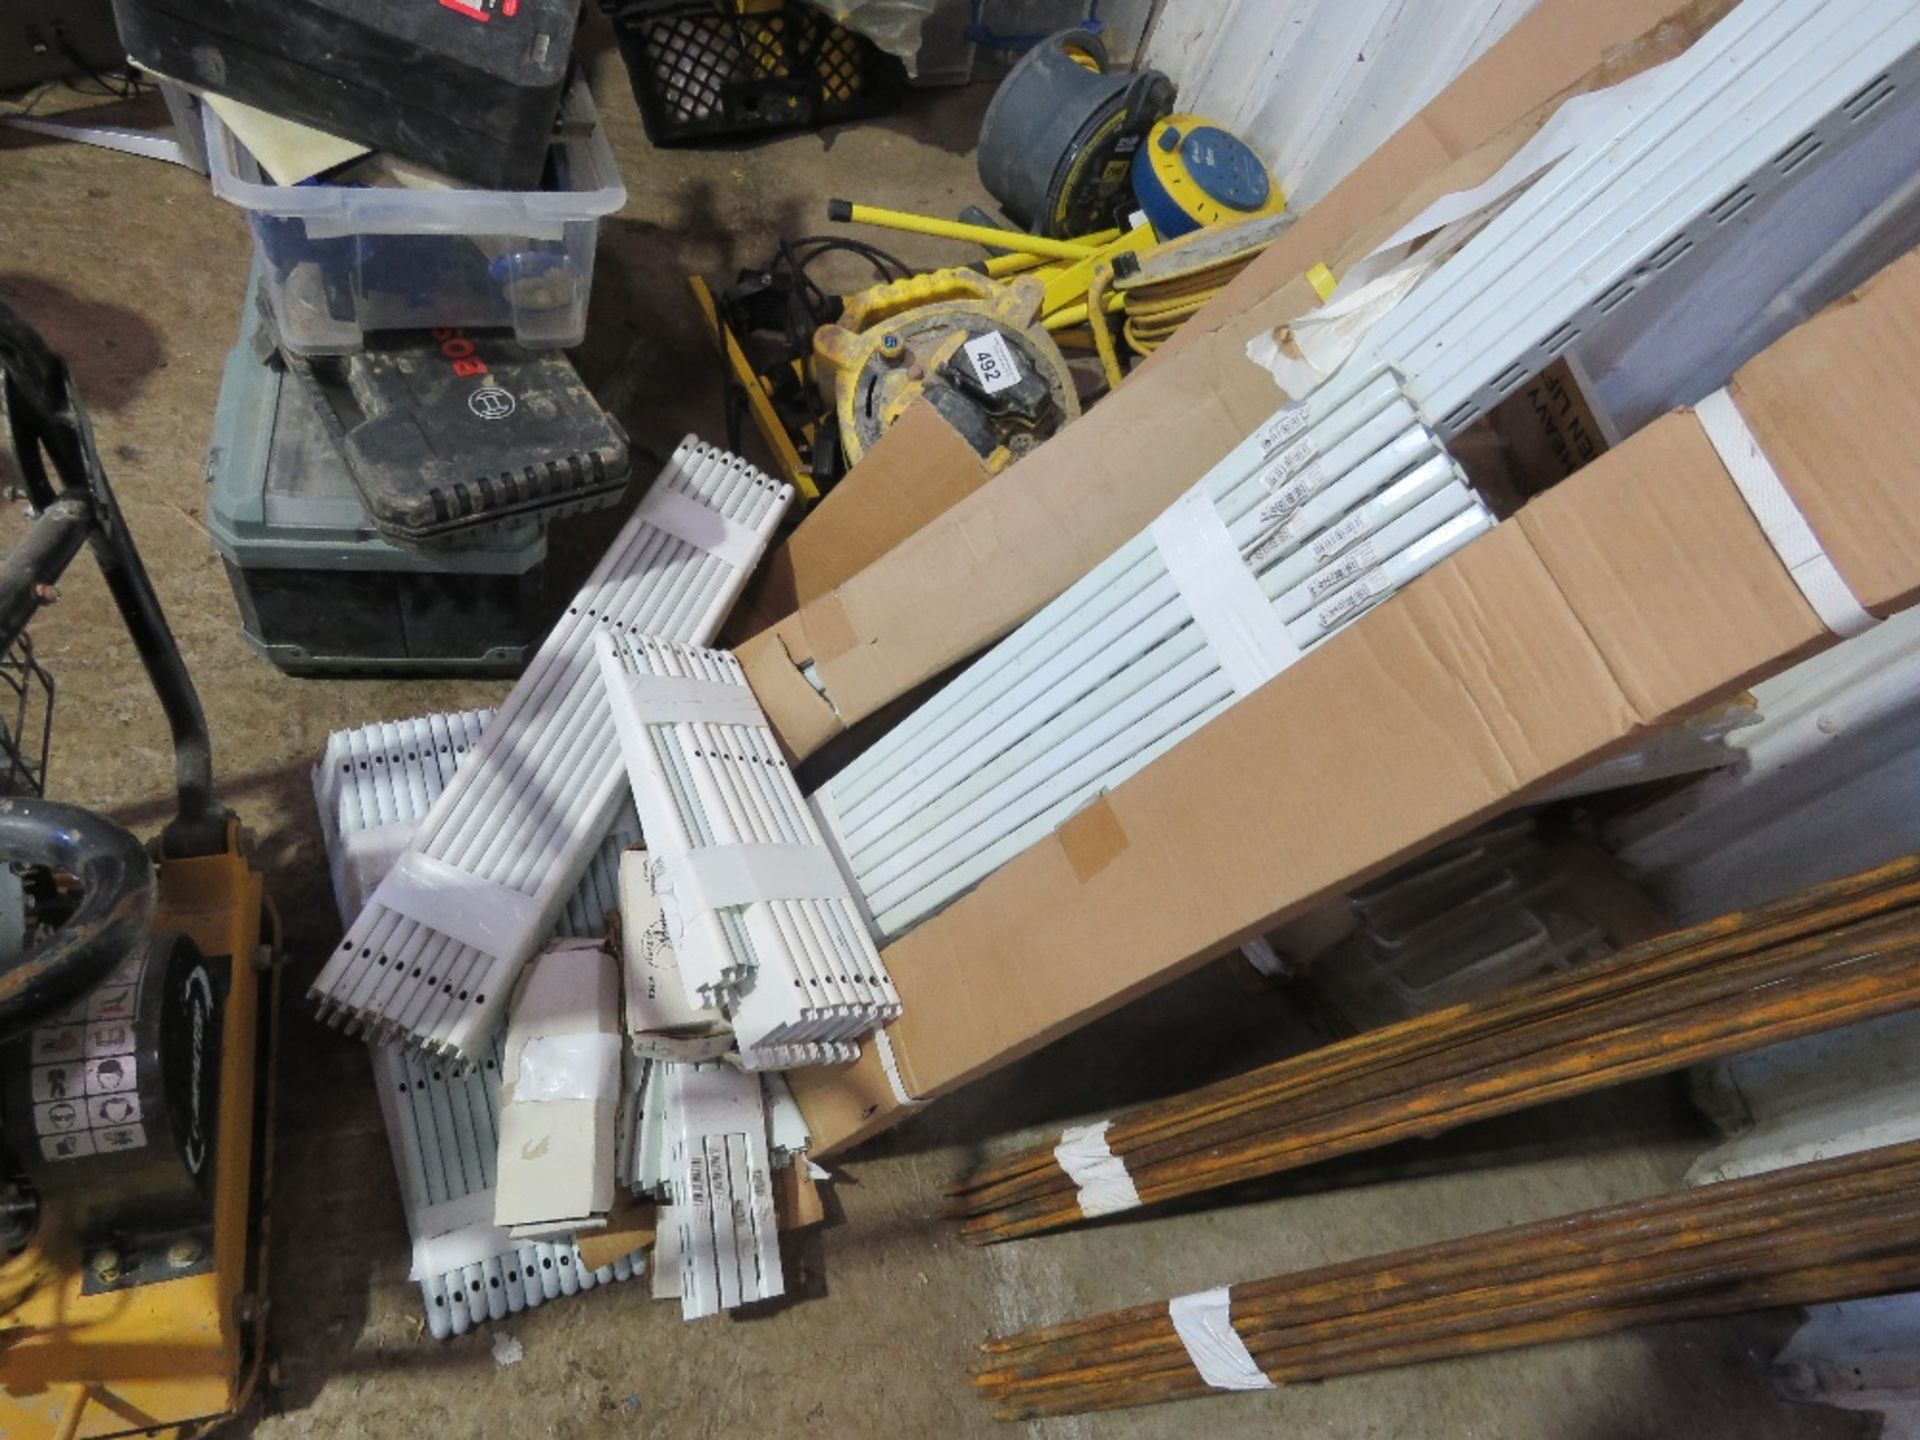 LARGE QUANTITY OF MODULAR SHELVING PARTS. DIRECT FROM LOCAL LANDSCAPE COMPANY WHO ARE CLOSING A DEPO